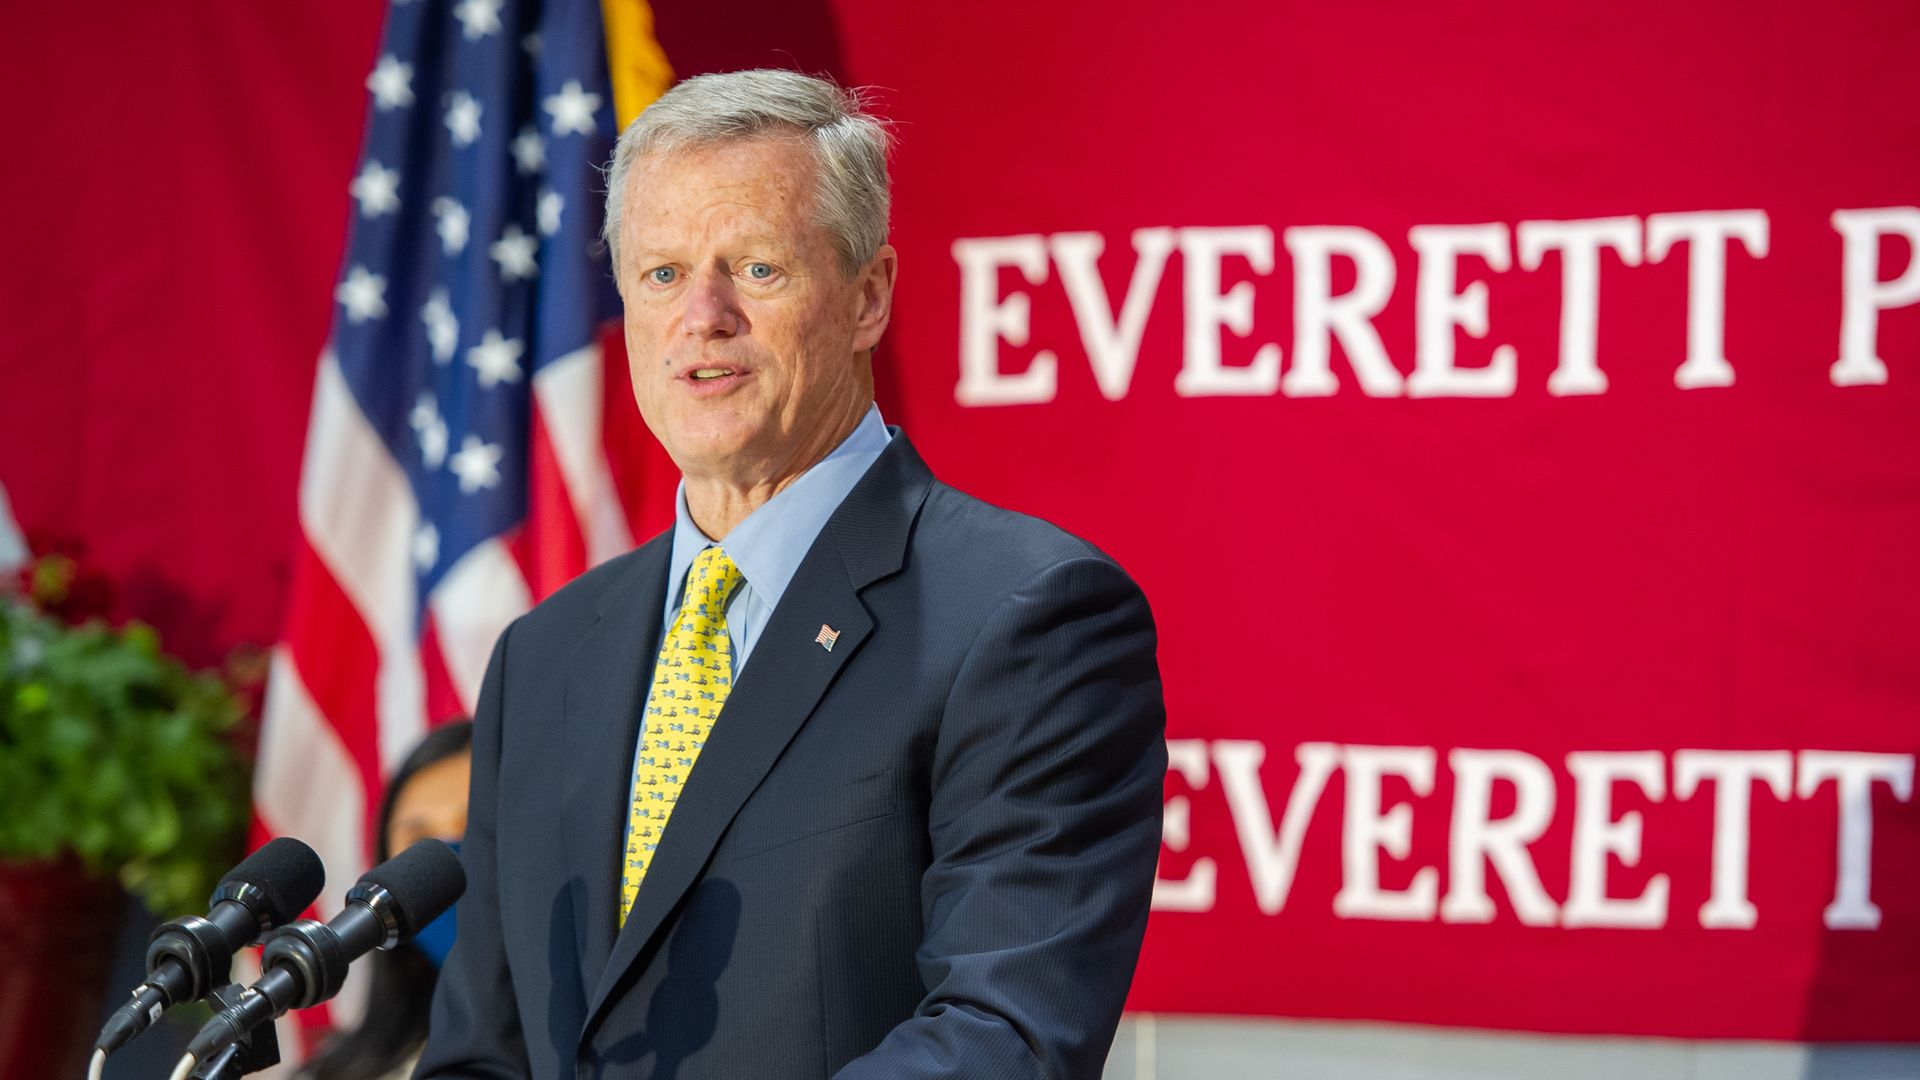 Photo of Charlie Baker in a suit speaking from a podium with a red wall and the American flag behind him 